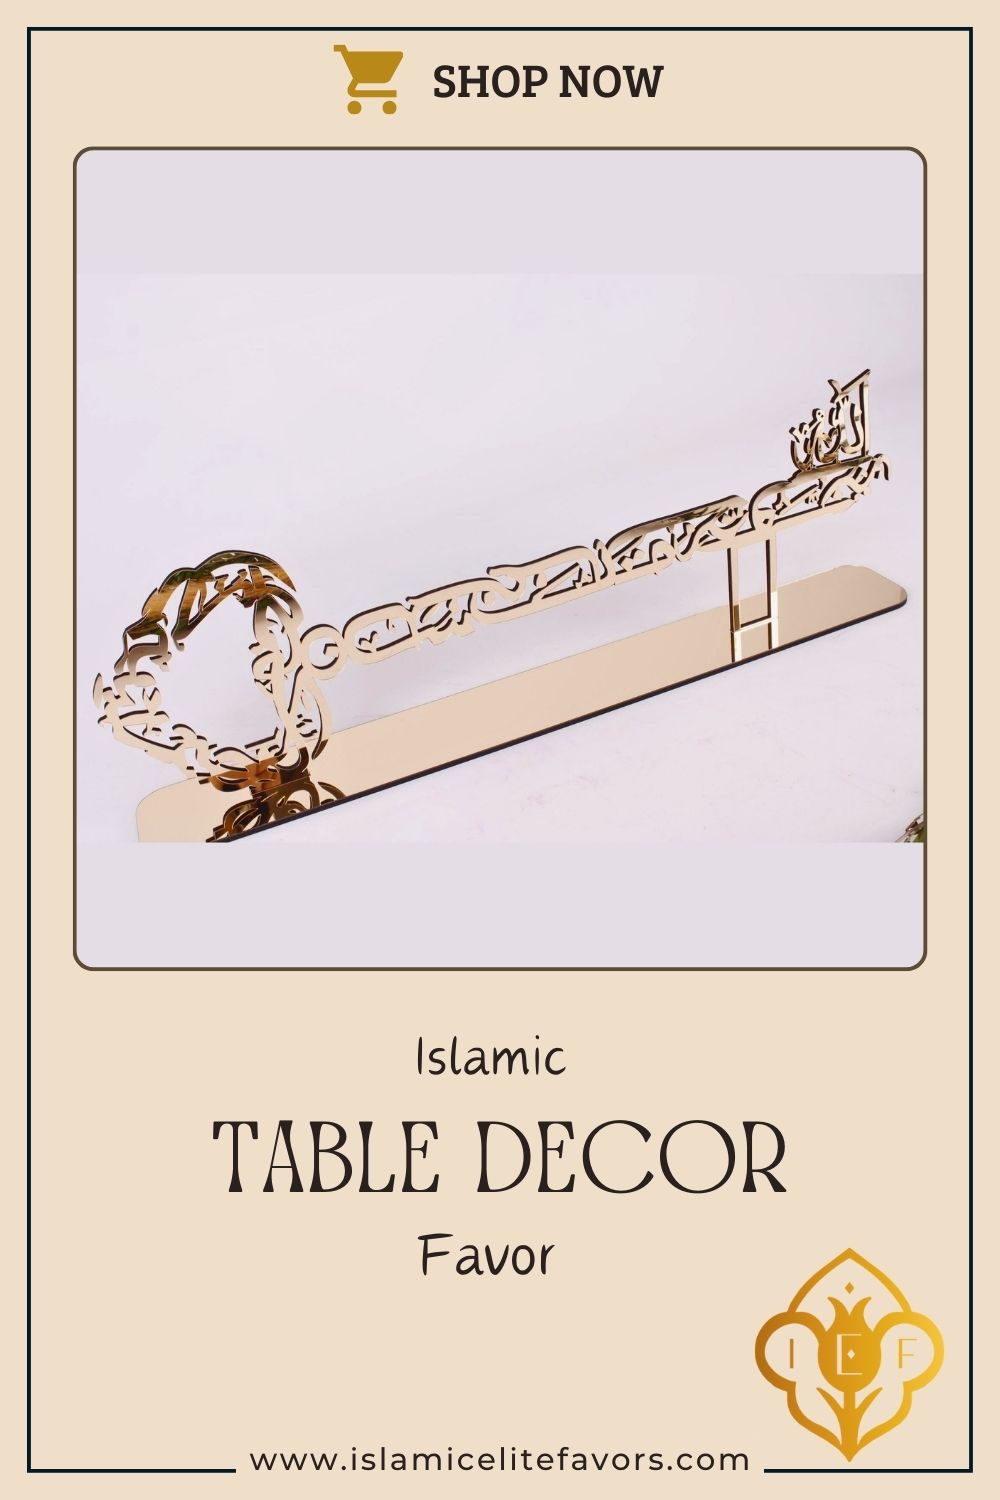 Key Shaped Bismillah Calligraphy Islamic Table Decor Ramadan Eid Gift - Islamic Elite Favors is a handmade gift shop offering a wide variety of unique and personalized gifts for all occasions. Whether you're looking for the perfect Ramadan, Eid, Hajj, wedding gift or something special for a birthday, baby shower or anniversary, we have something for everyone. High quality, made with love.